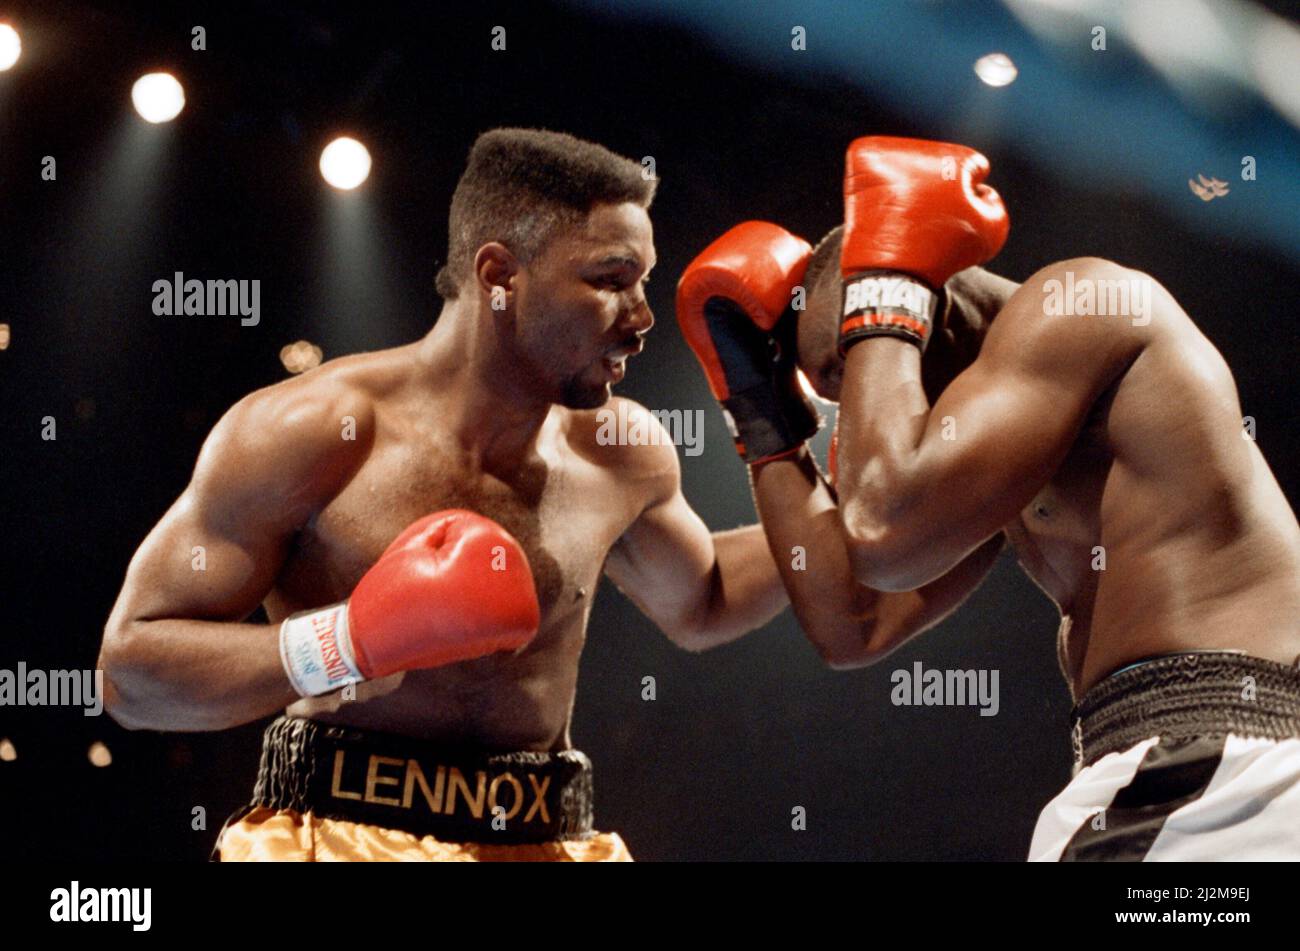 Professional debut for the 1988 Super Heavyweight Olympic Gold Medalist Lennox Lewis.Lewis stopped Al Malcolm in round two wining his first pro fight. 27th June 1989 Stock Photo